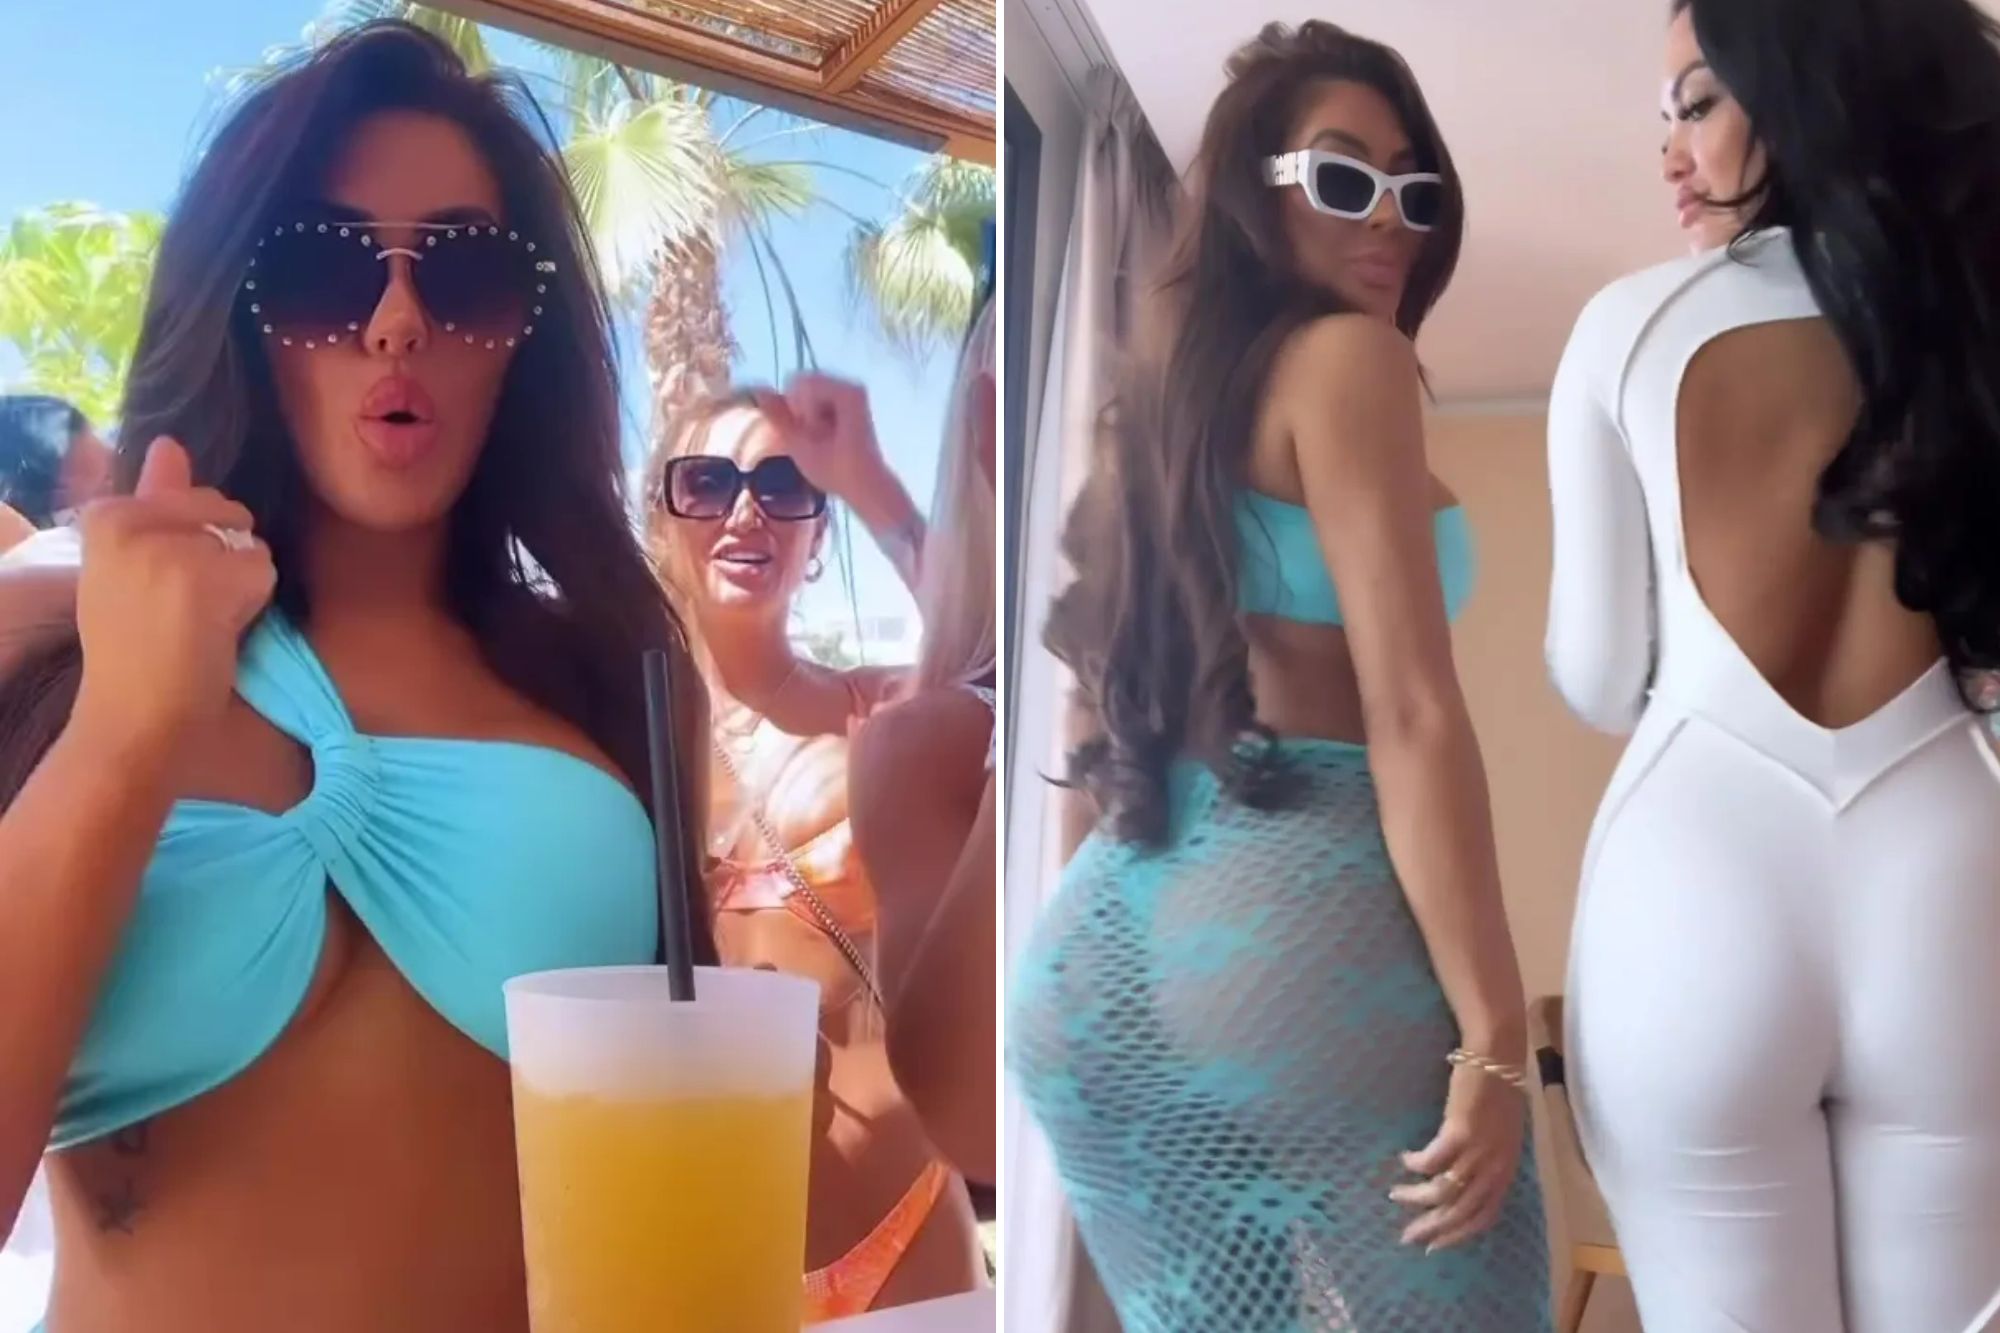 Chloe Ferry leaves little to the imagination as she twerks in Ibiza